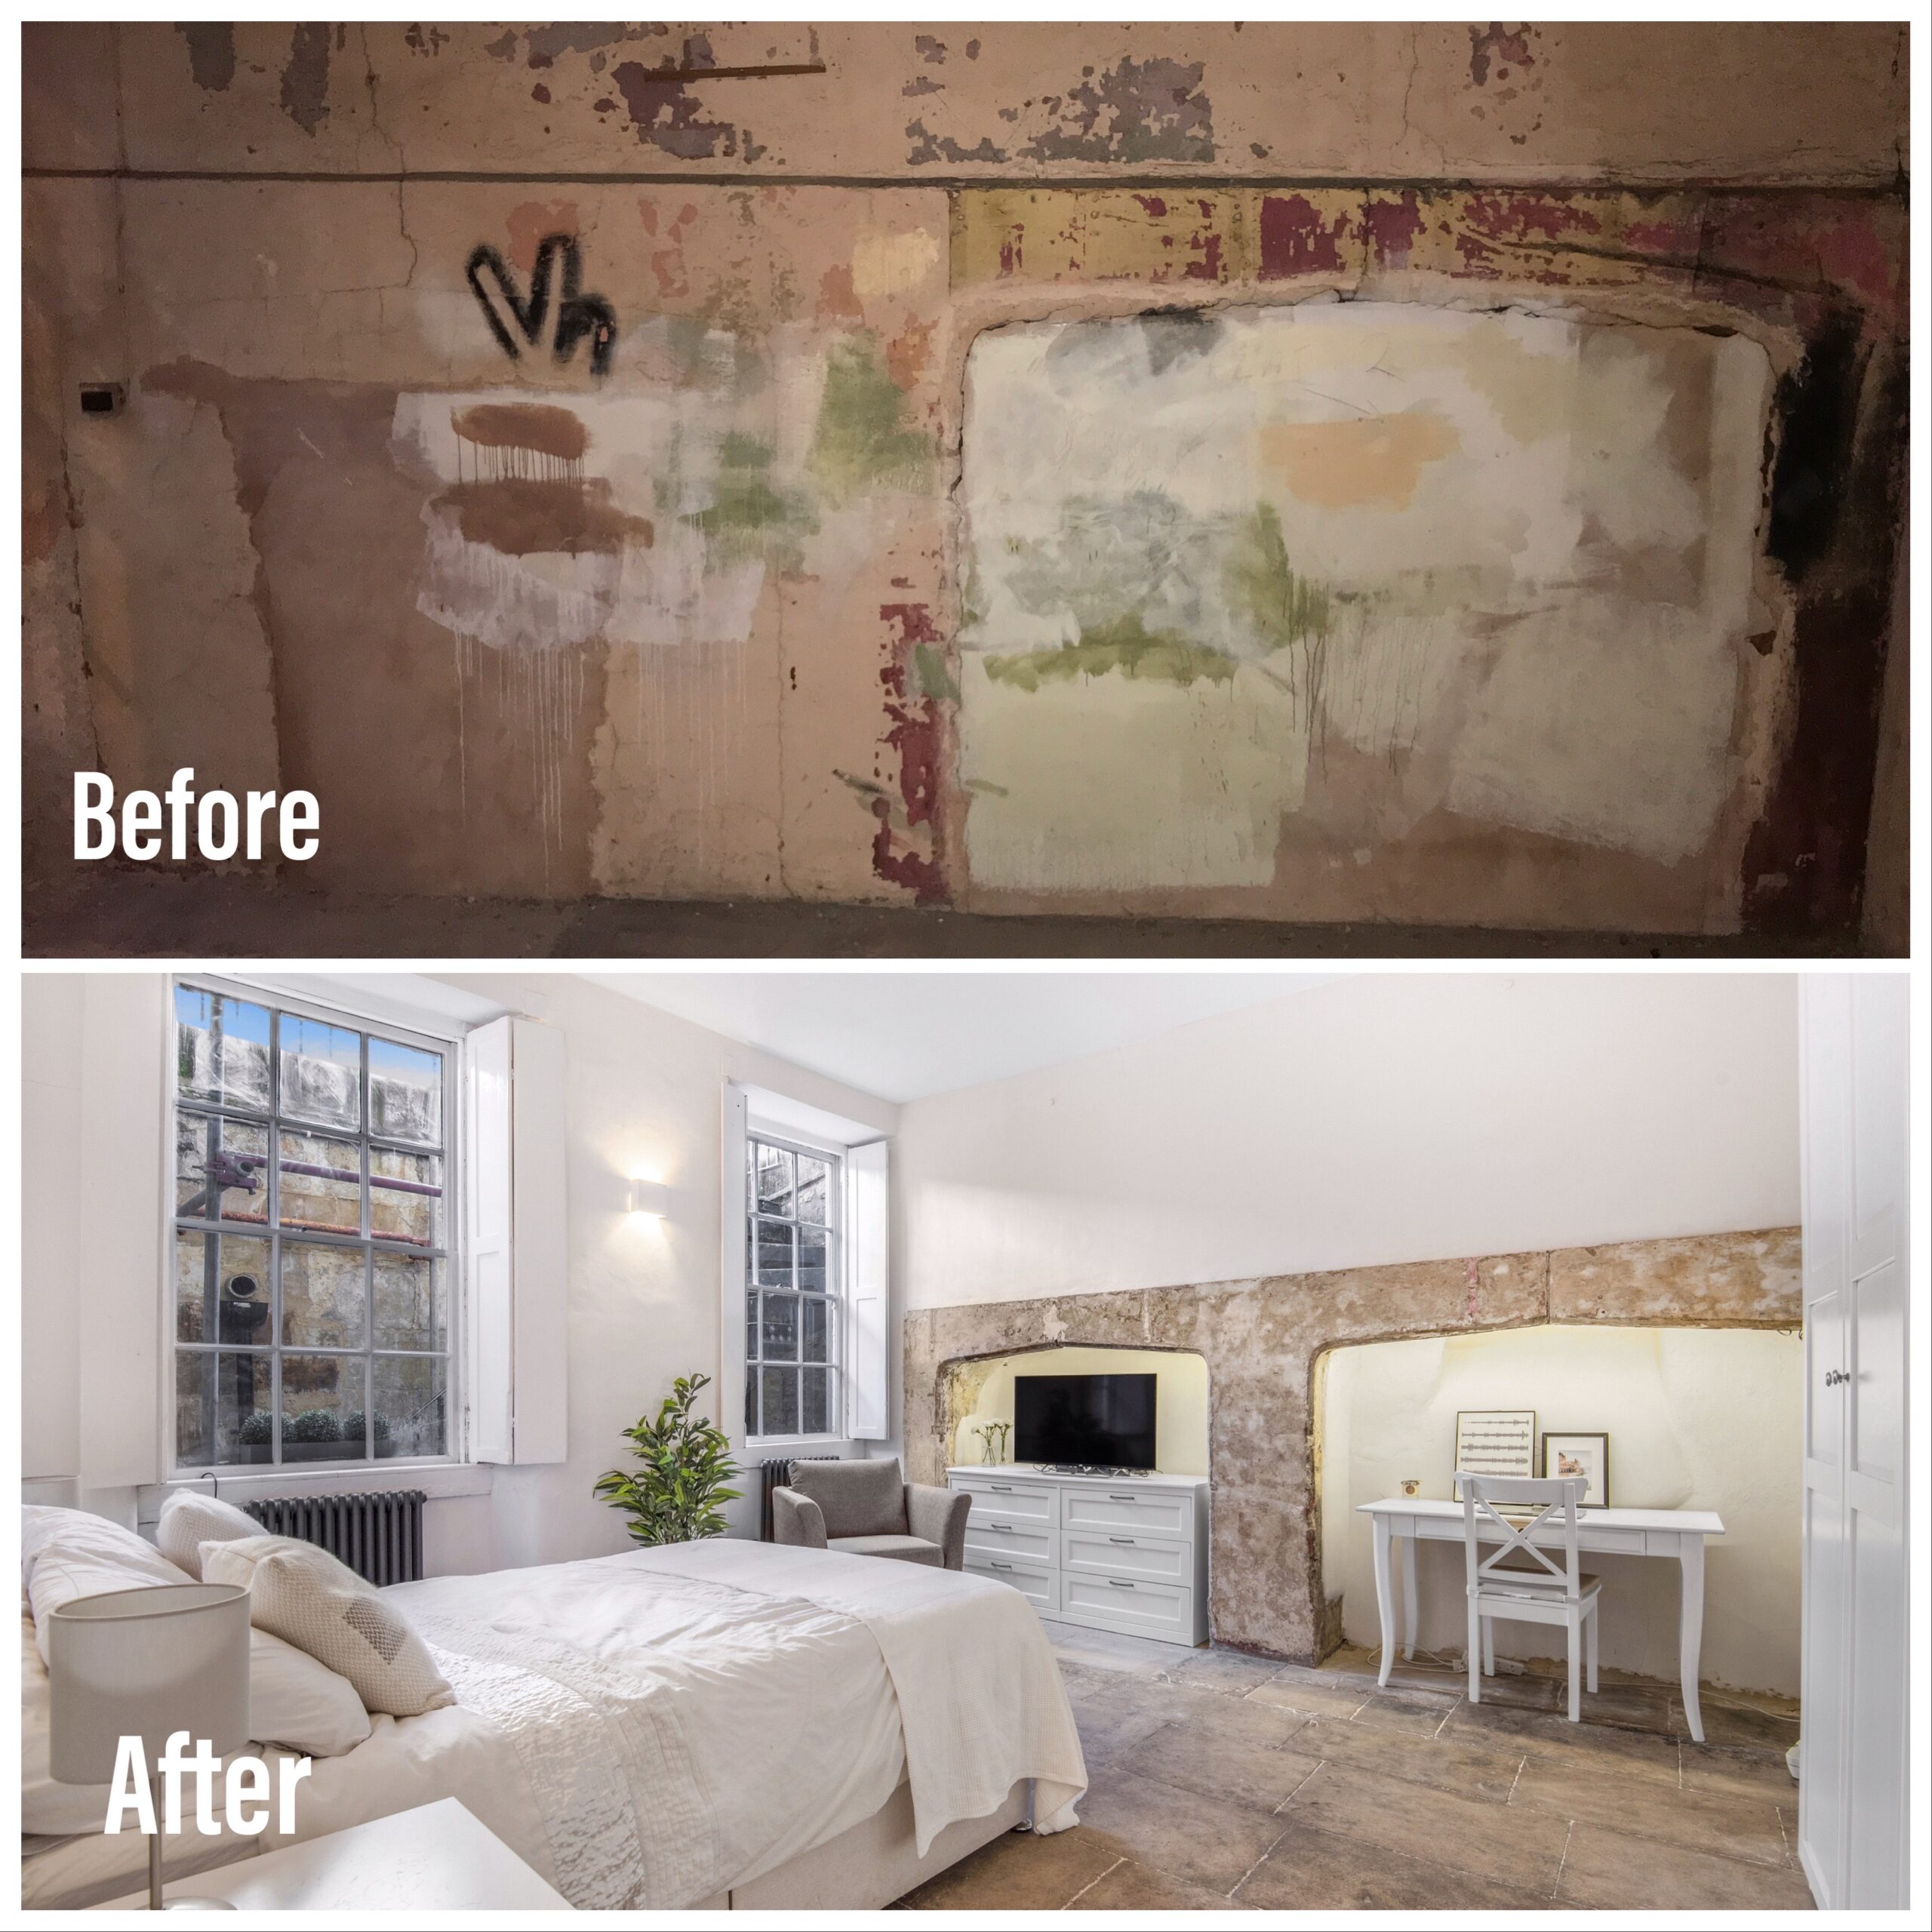 Old walls in this period home were plastered in lime to ensure they remained breathable